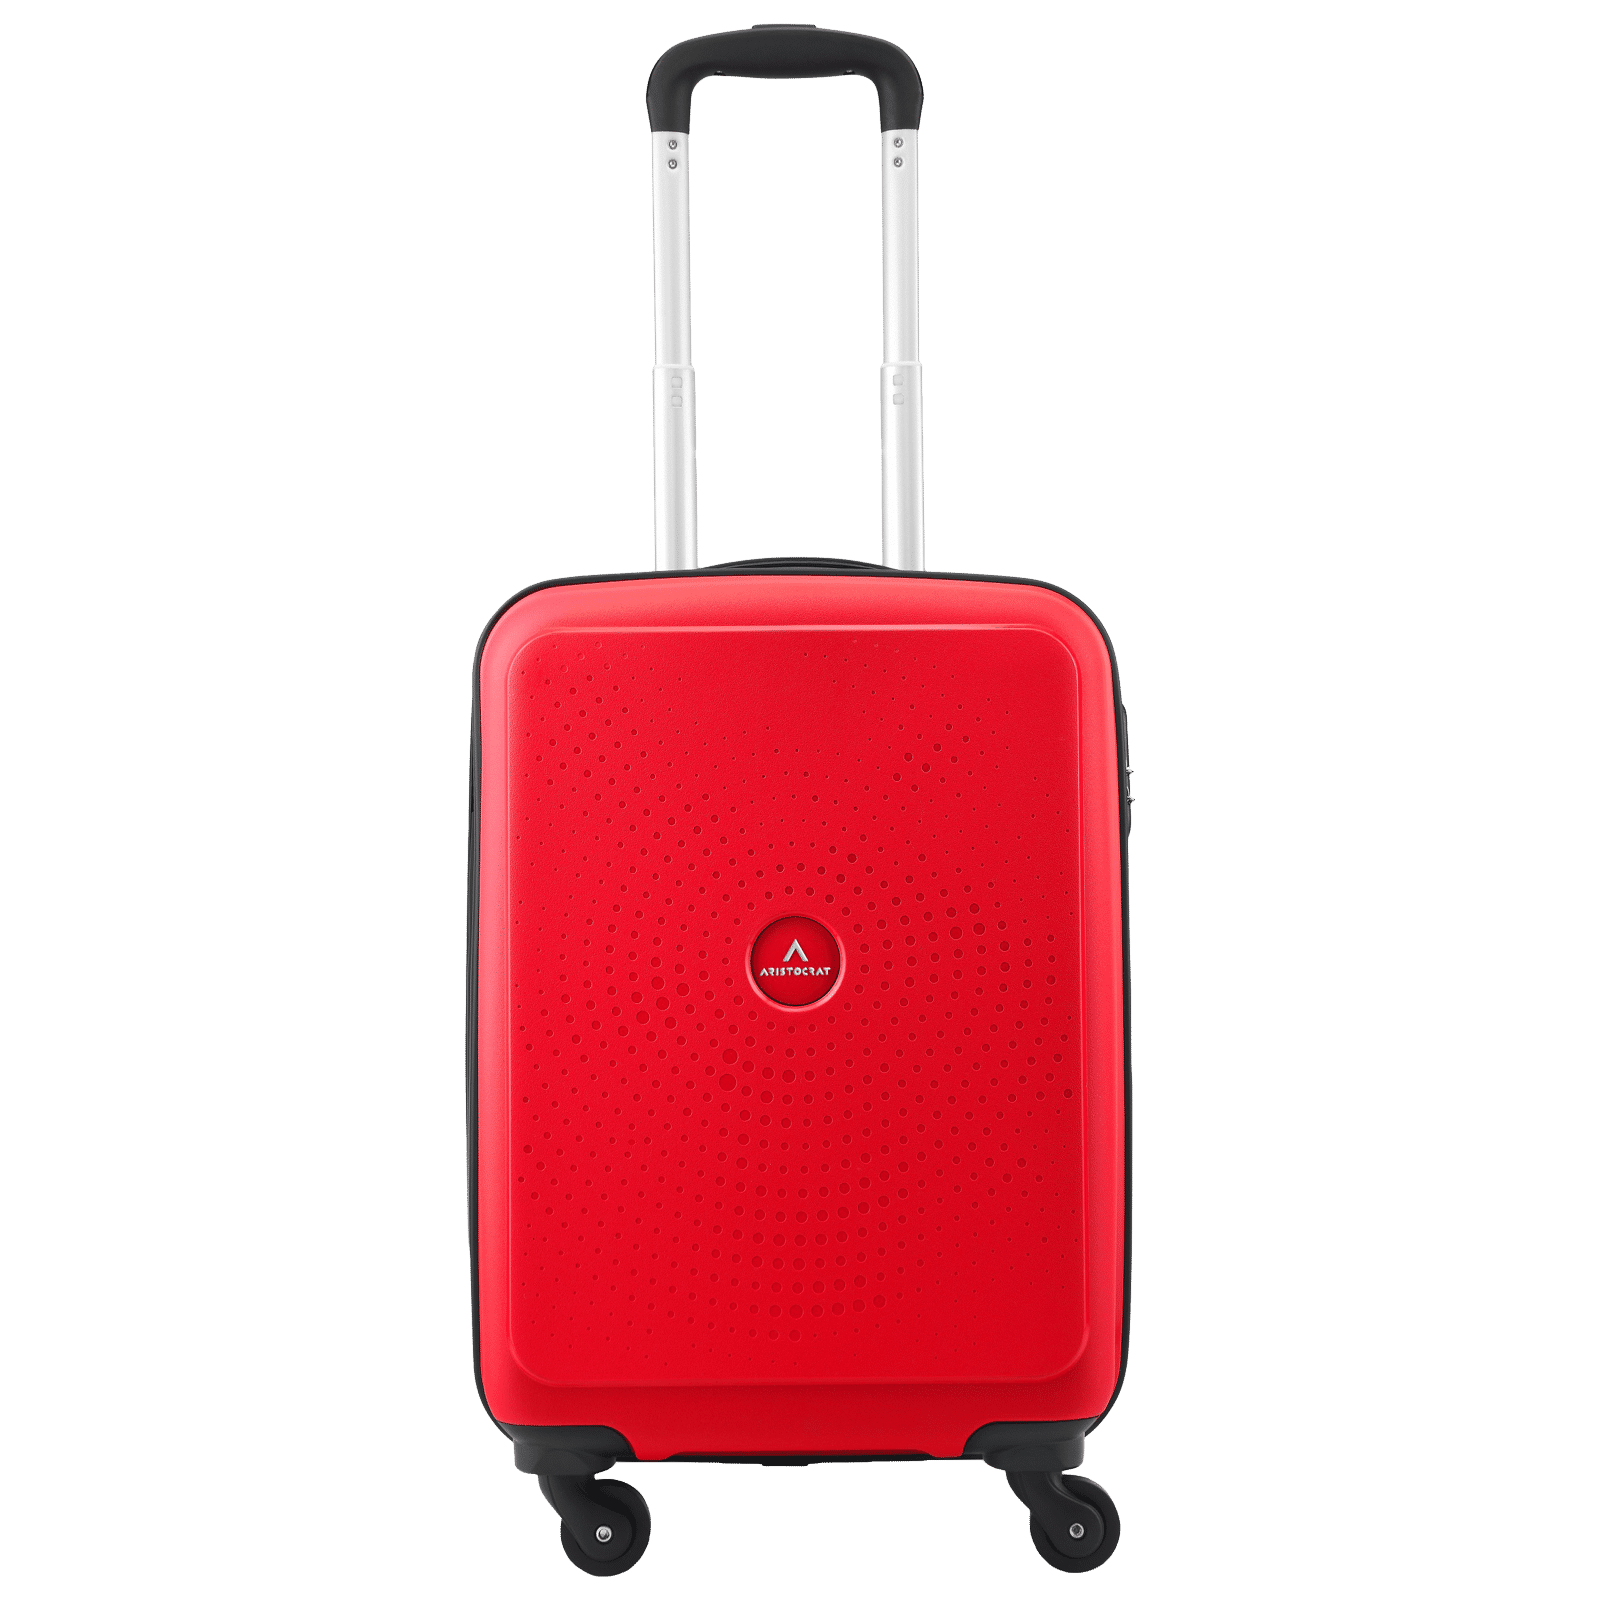 Aristocrat Overnighter Luggage Trolley bag best bag for gift use Ragular  and Office use #trollybag - YouTube